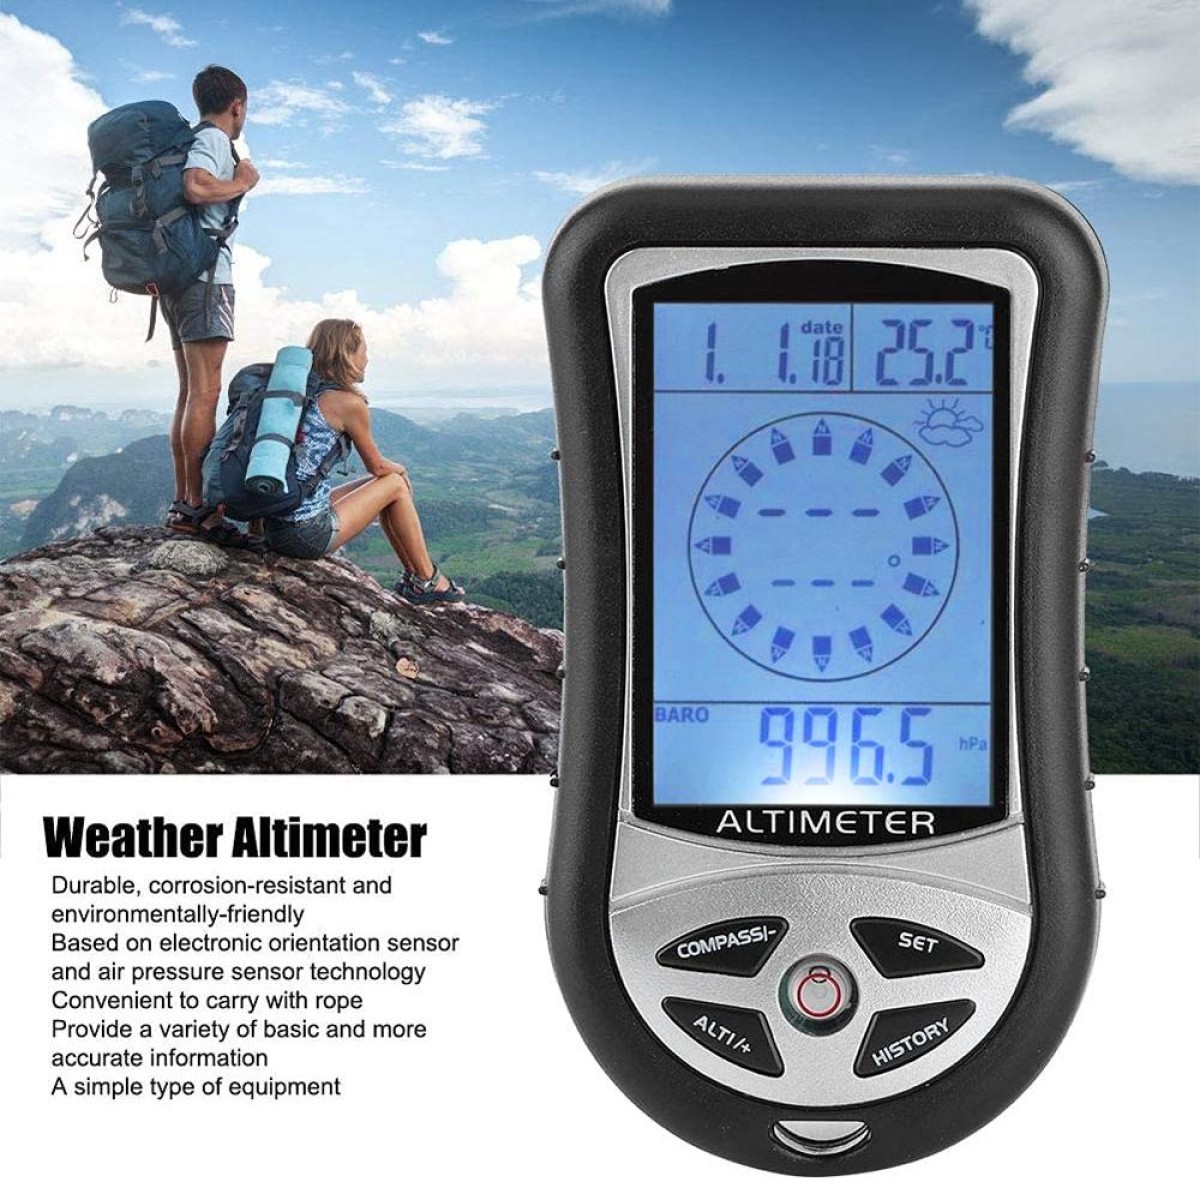 8 in 1 (Altimeter + Weather + Altitude + Compass + Thermometer + Clock + Calender + LED Backlight) Multifunction Digital Altimeter Watch Compass